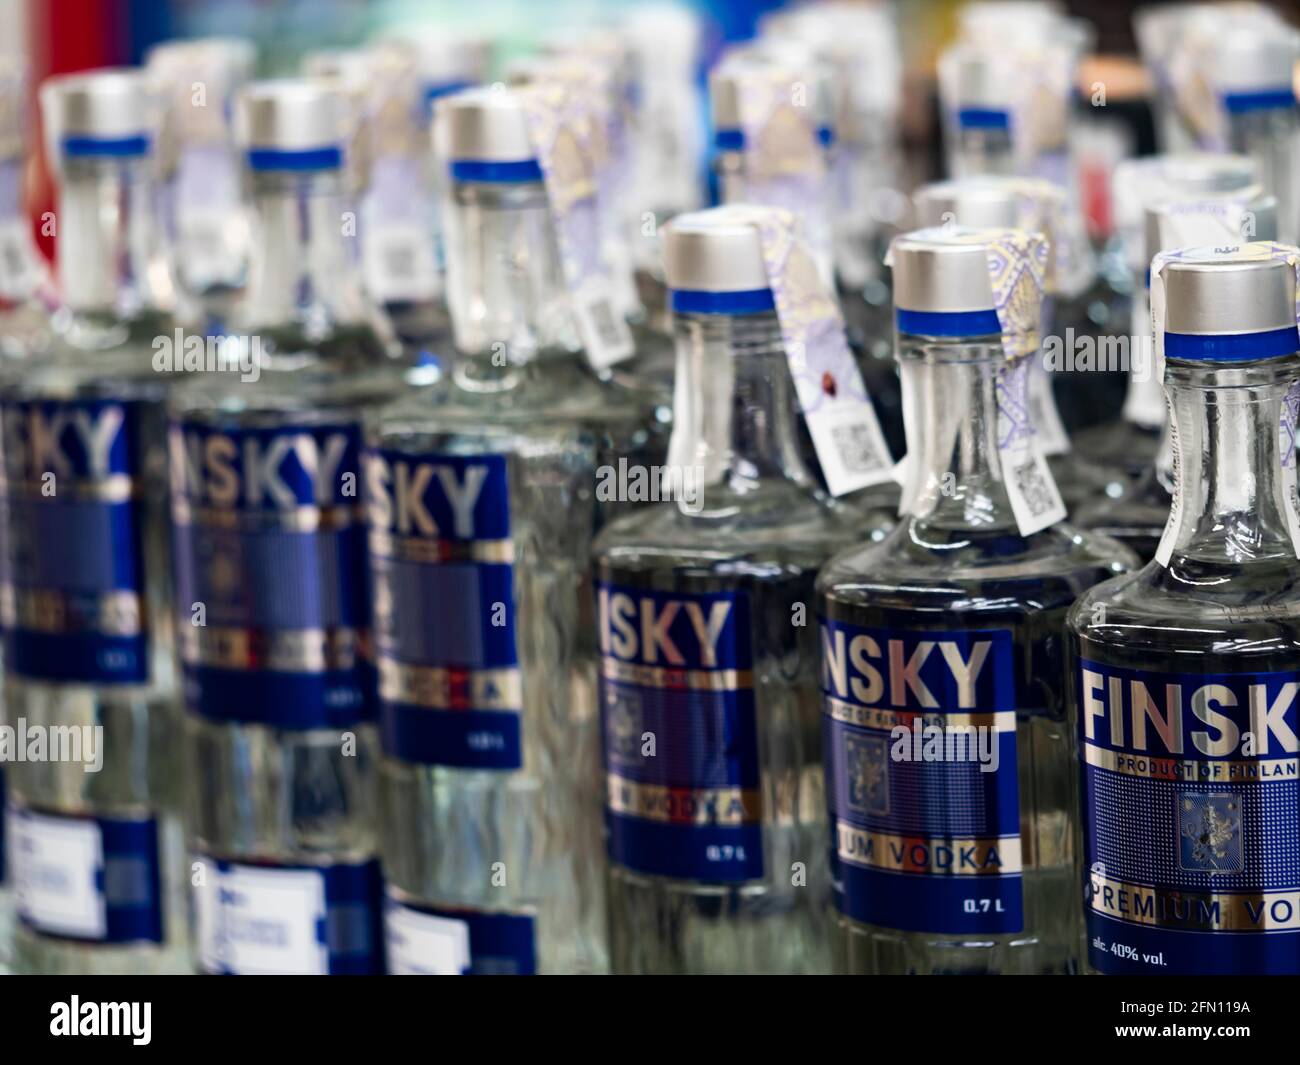 Finsky brand vodka on store shelf. Saimaa Beverages Oy Ltd is a vodka  producer that carries on almost a century of tradition in the production of  food and beverages in Finland Stock